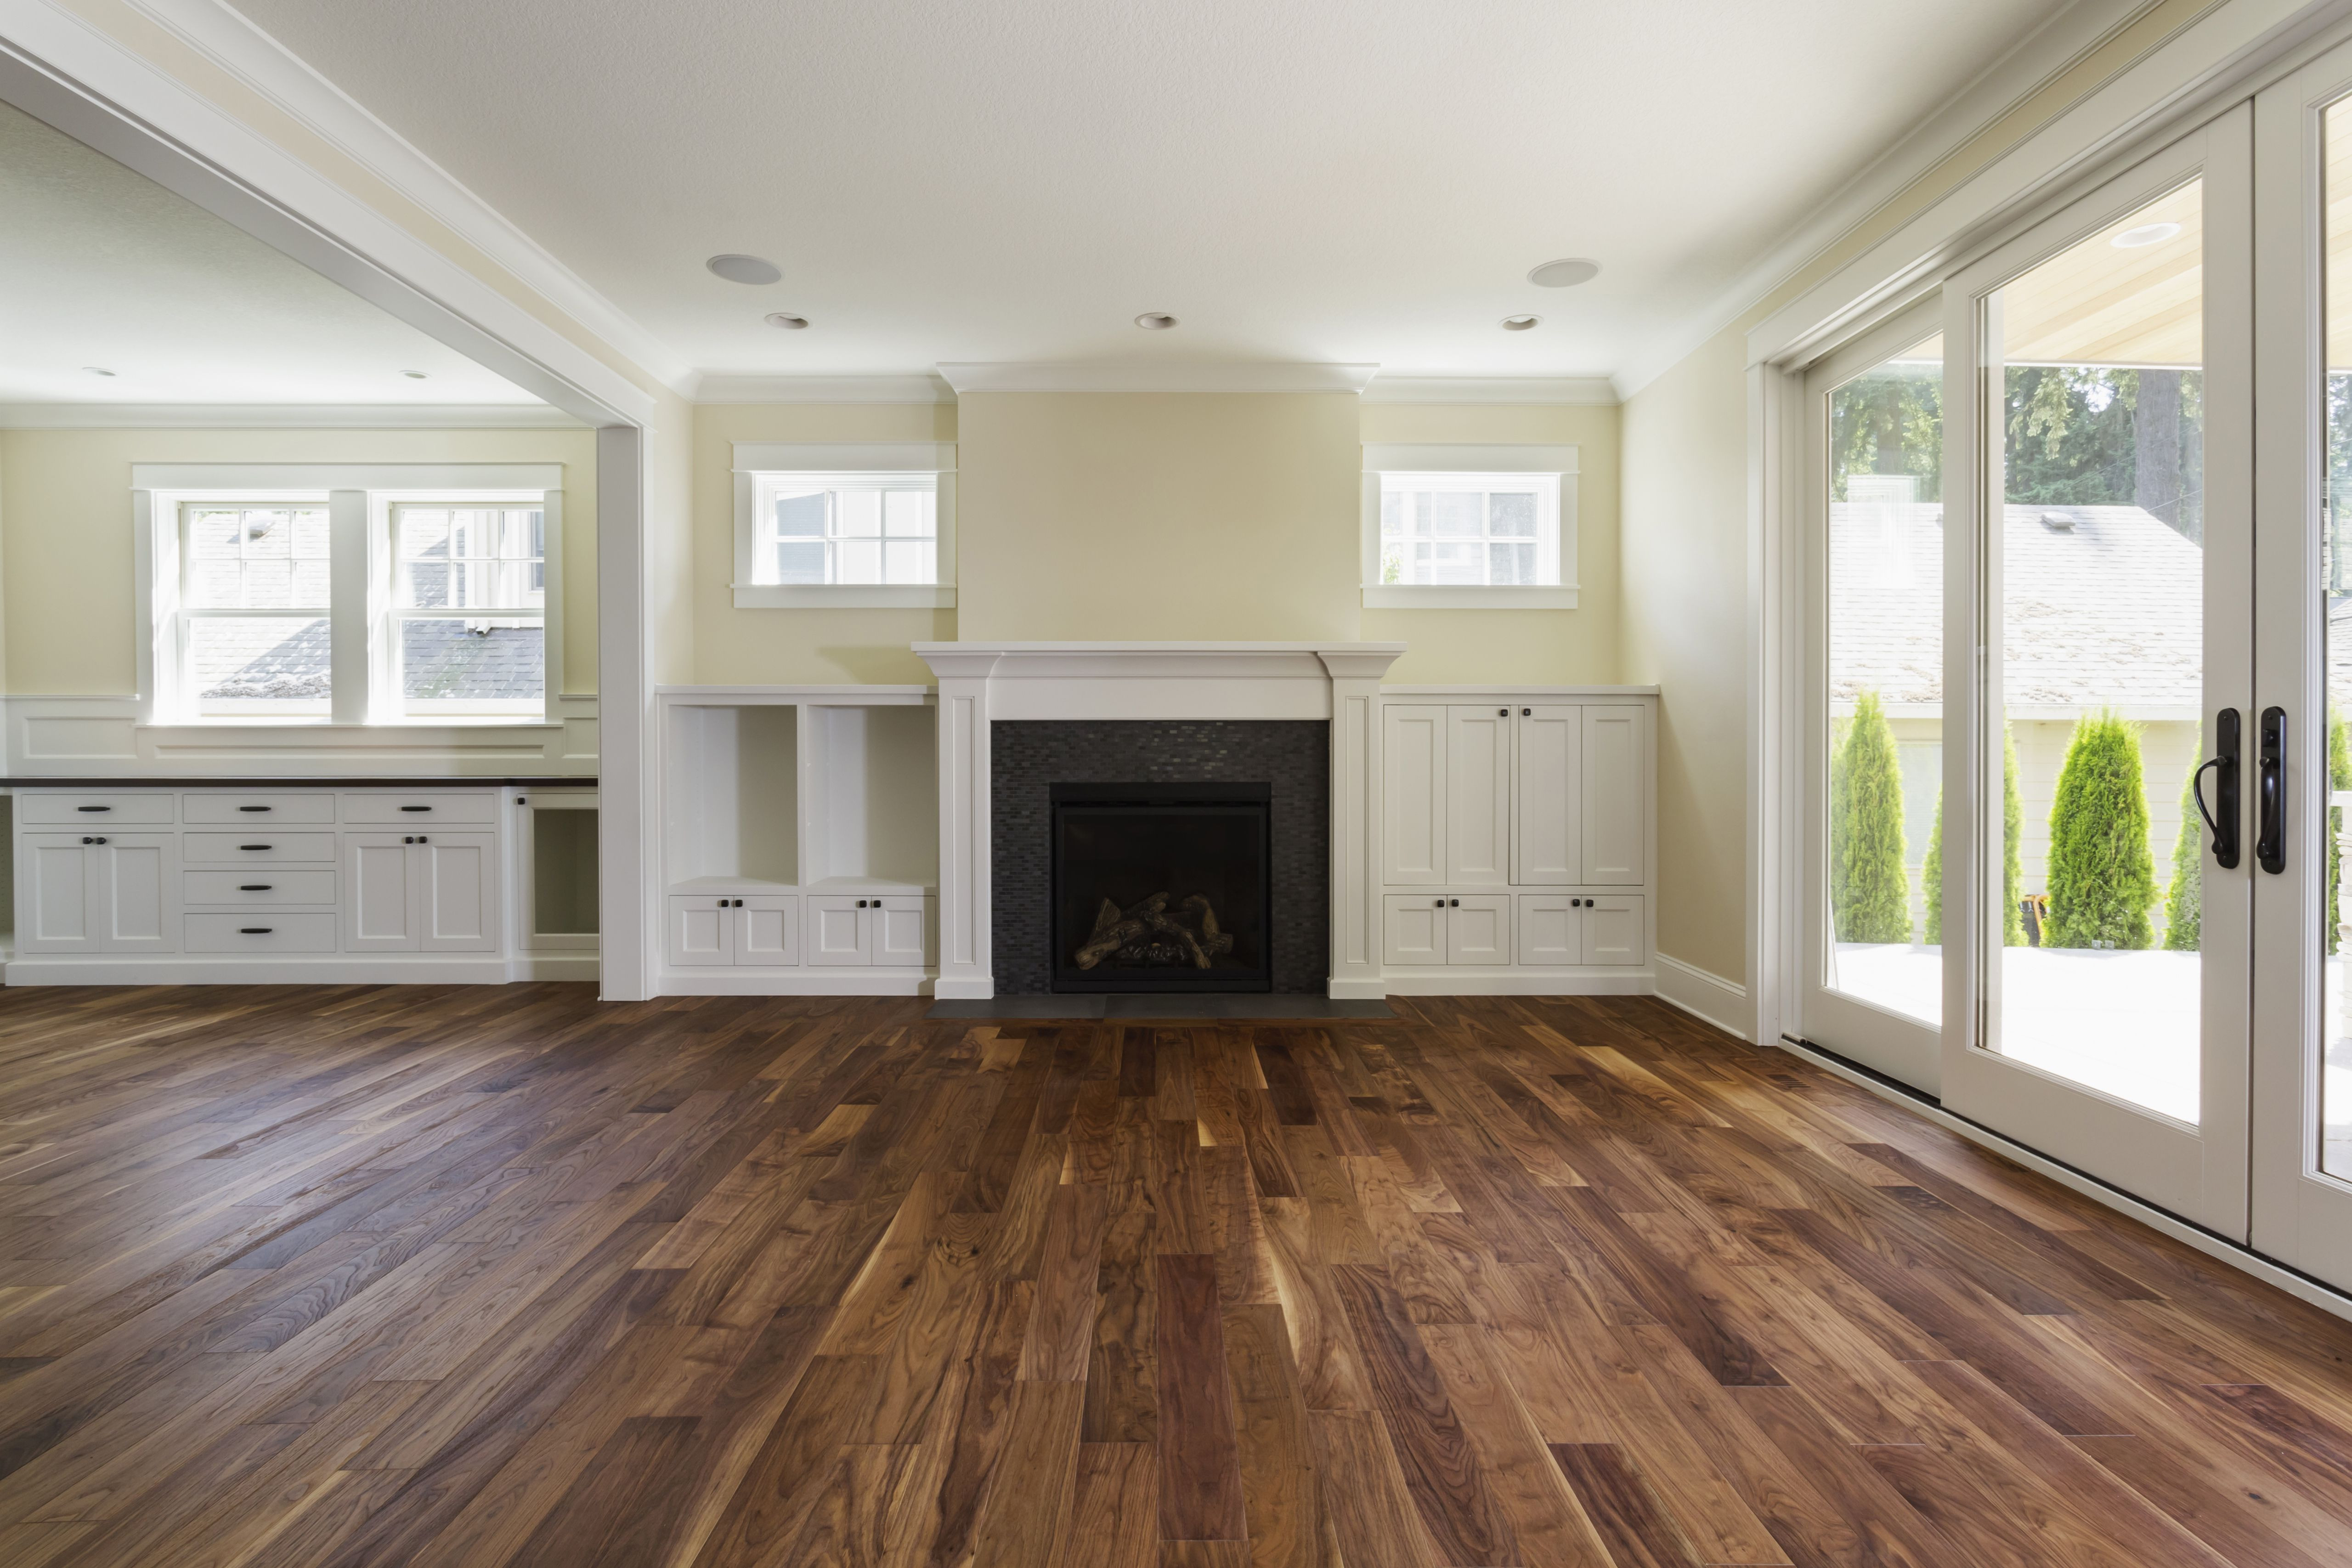 17 Unique Sanding and Restaining Hardwood Floors Cost 2024 free download sanding and restaining hardwood floors cost of the pros and cons of prefinished hardwood flooring with regard to fireplace and built in shelves in living room 482143011 57bef8e33df78cc16e035